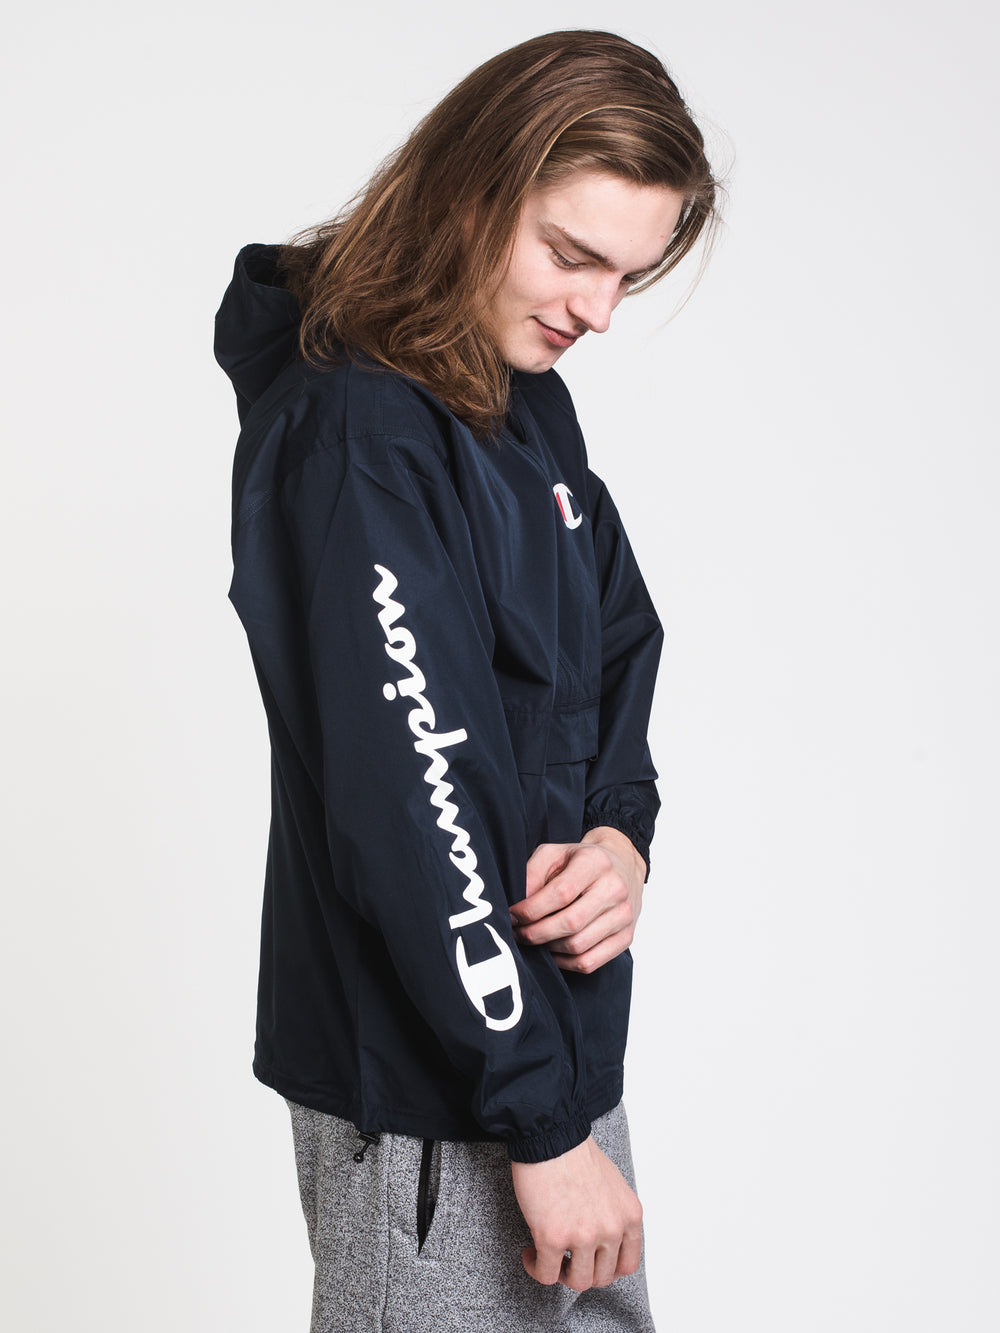 CHAMPION PACKABLE LOGO JACKET  - CLEARANCE